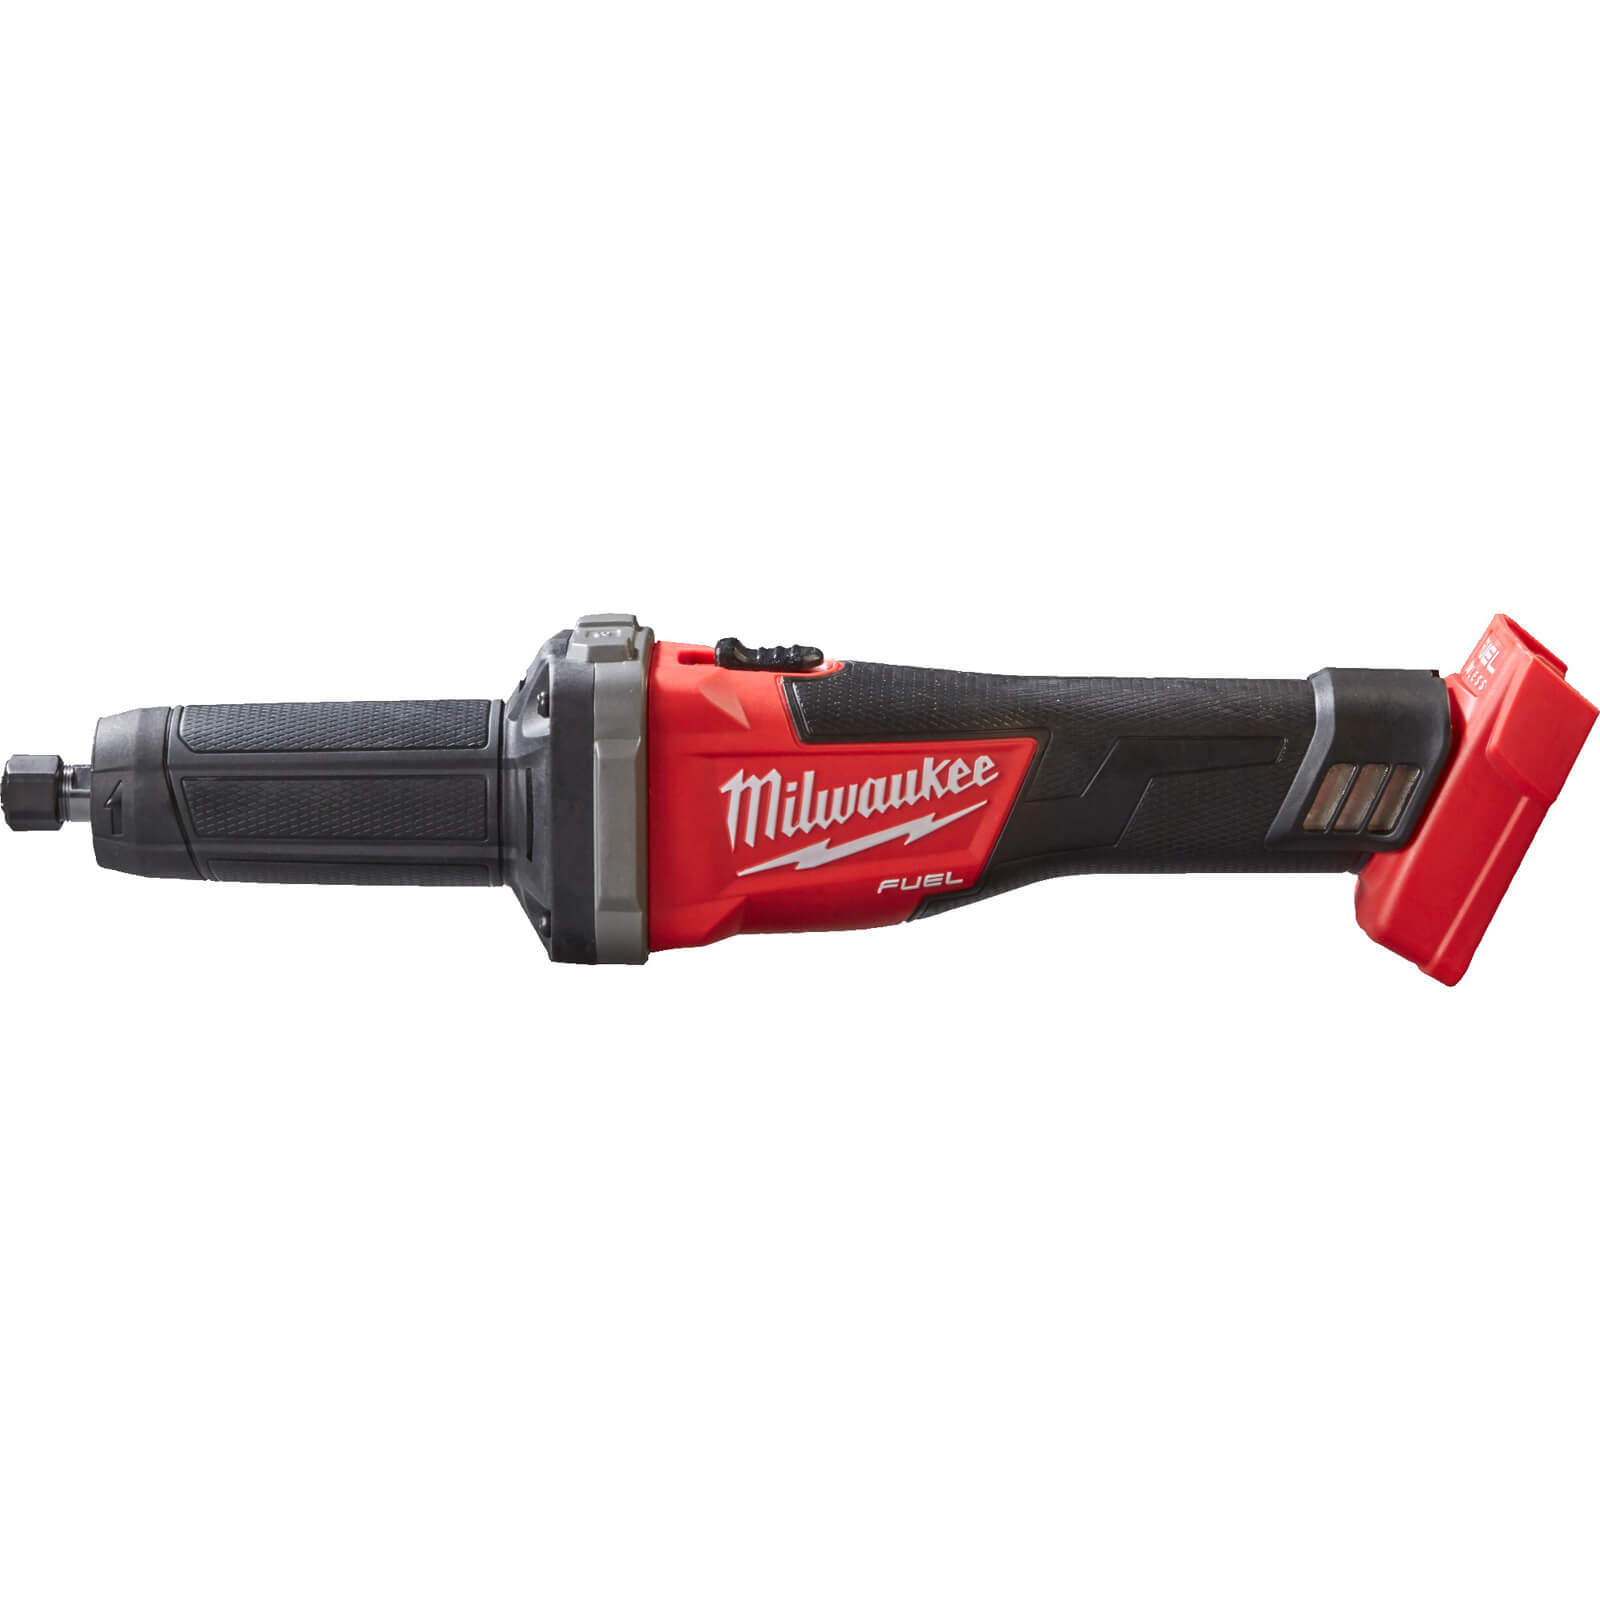 Image of Milwaukee M18 FDG Fuel 18v Cordless Brushless Die Grinder No Batteries No Charger No Case